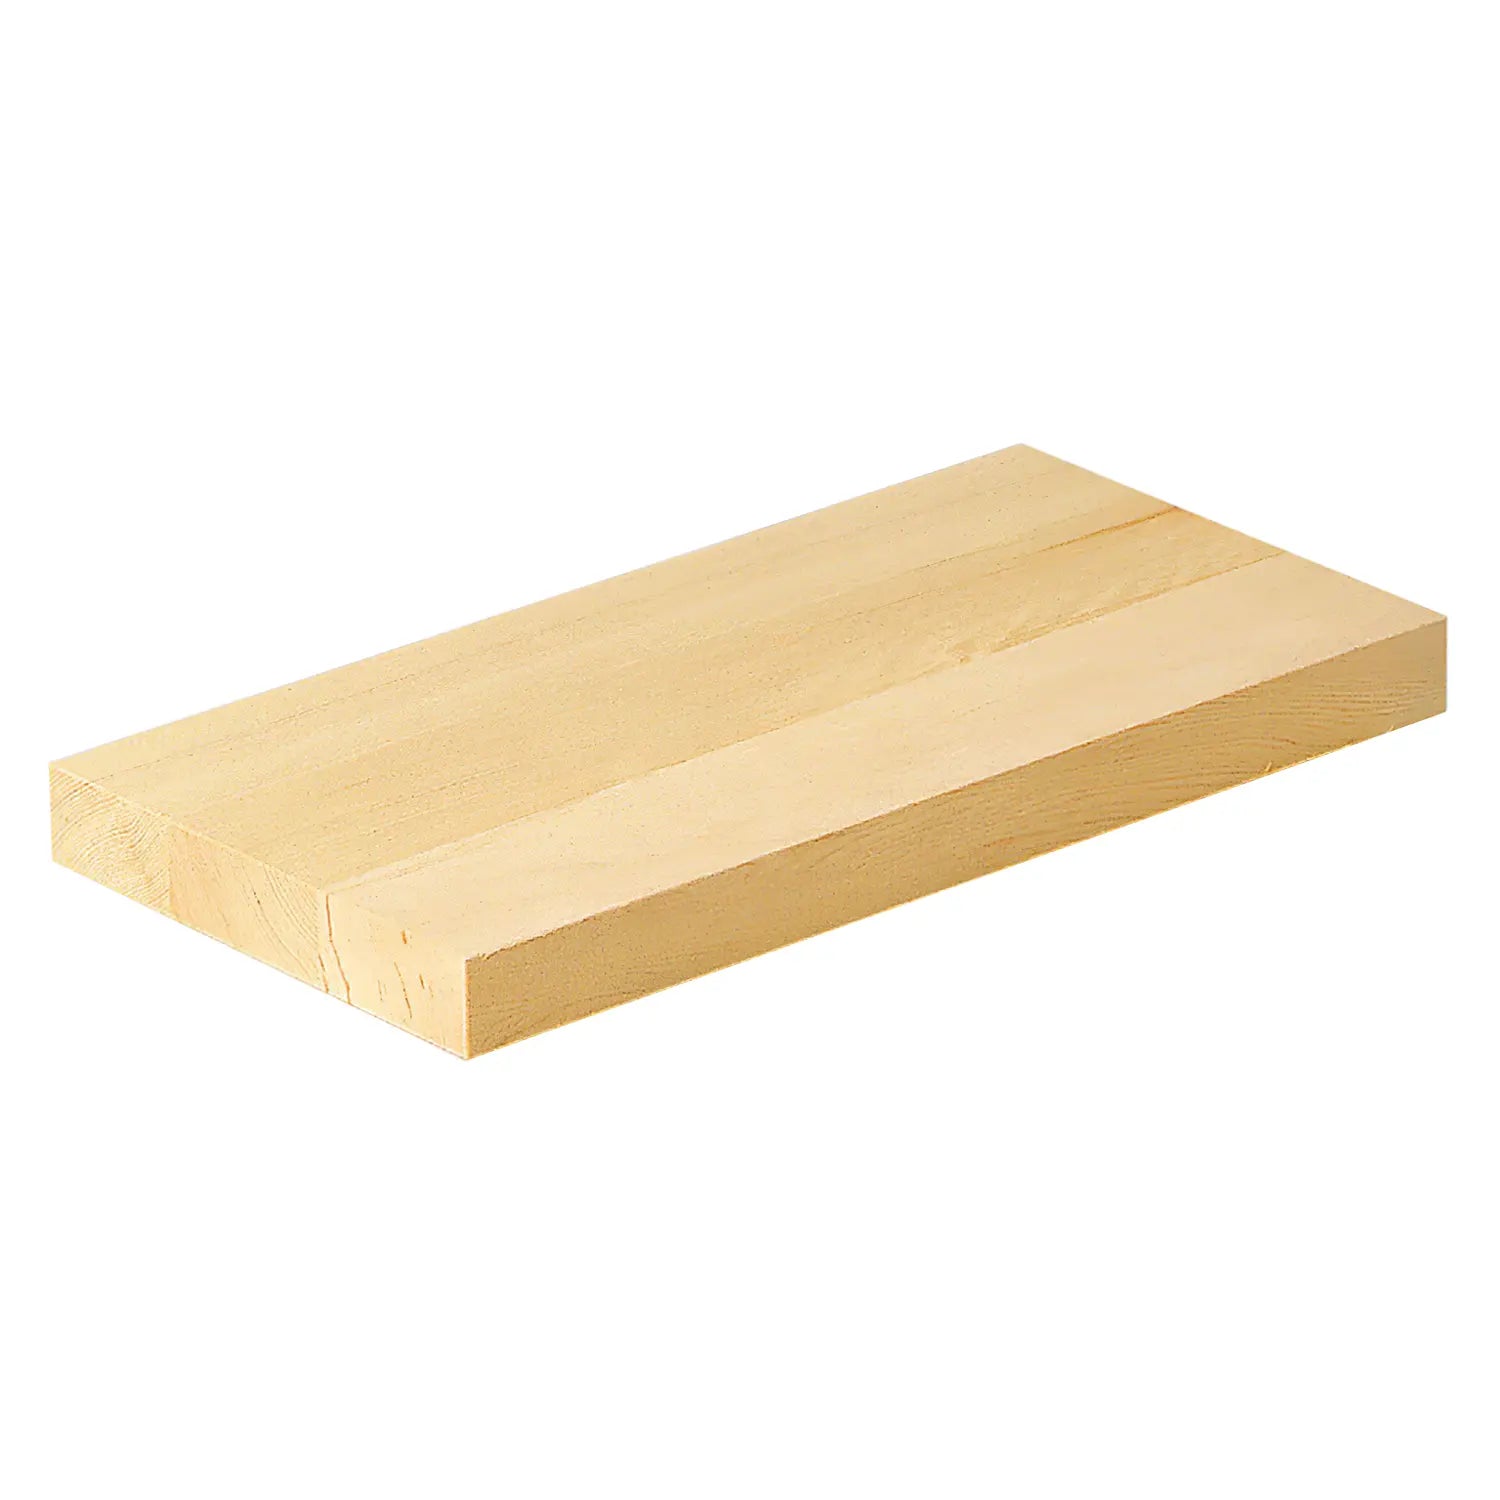 https://cdn.shopify.com/s/files/1/1610/3863/products/YamacohHinokiCypressWoodenCuttingBoard05206_1_1600x.webp?v=1668733180